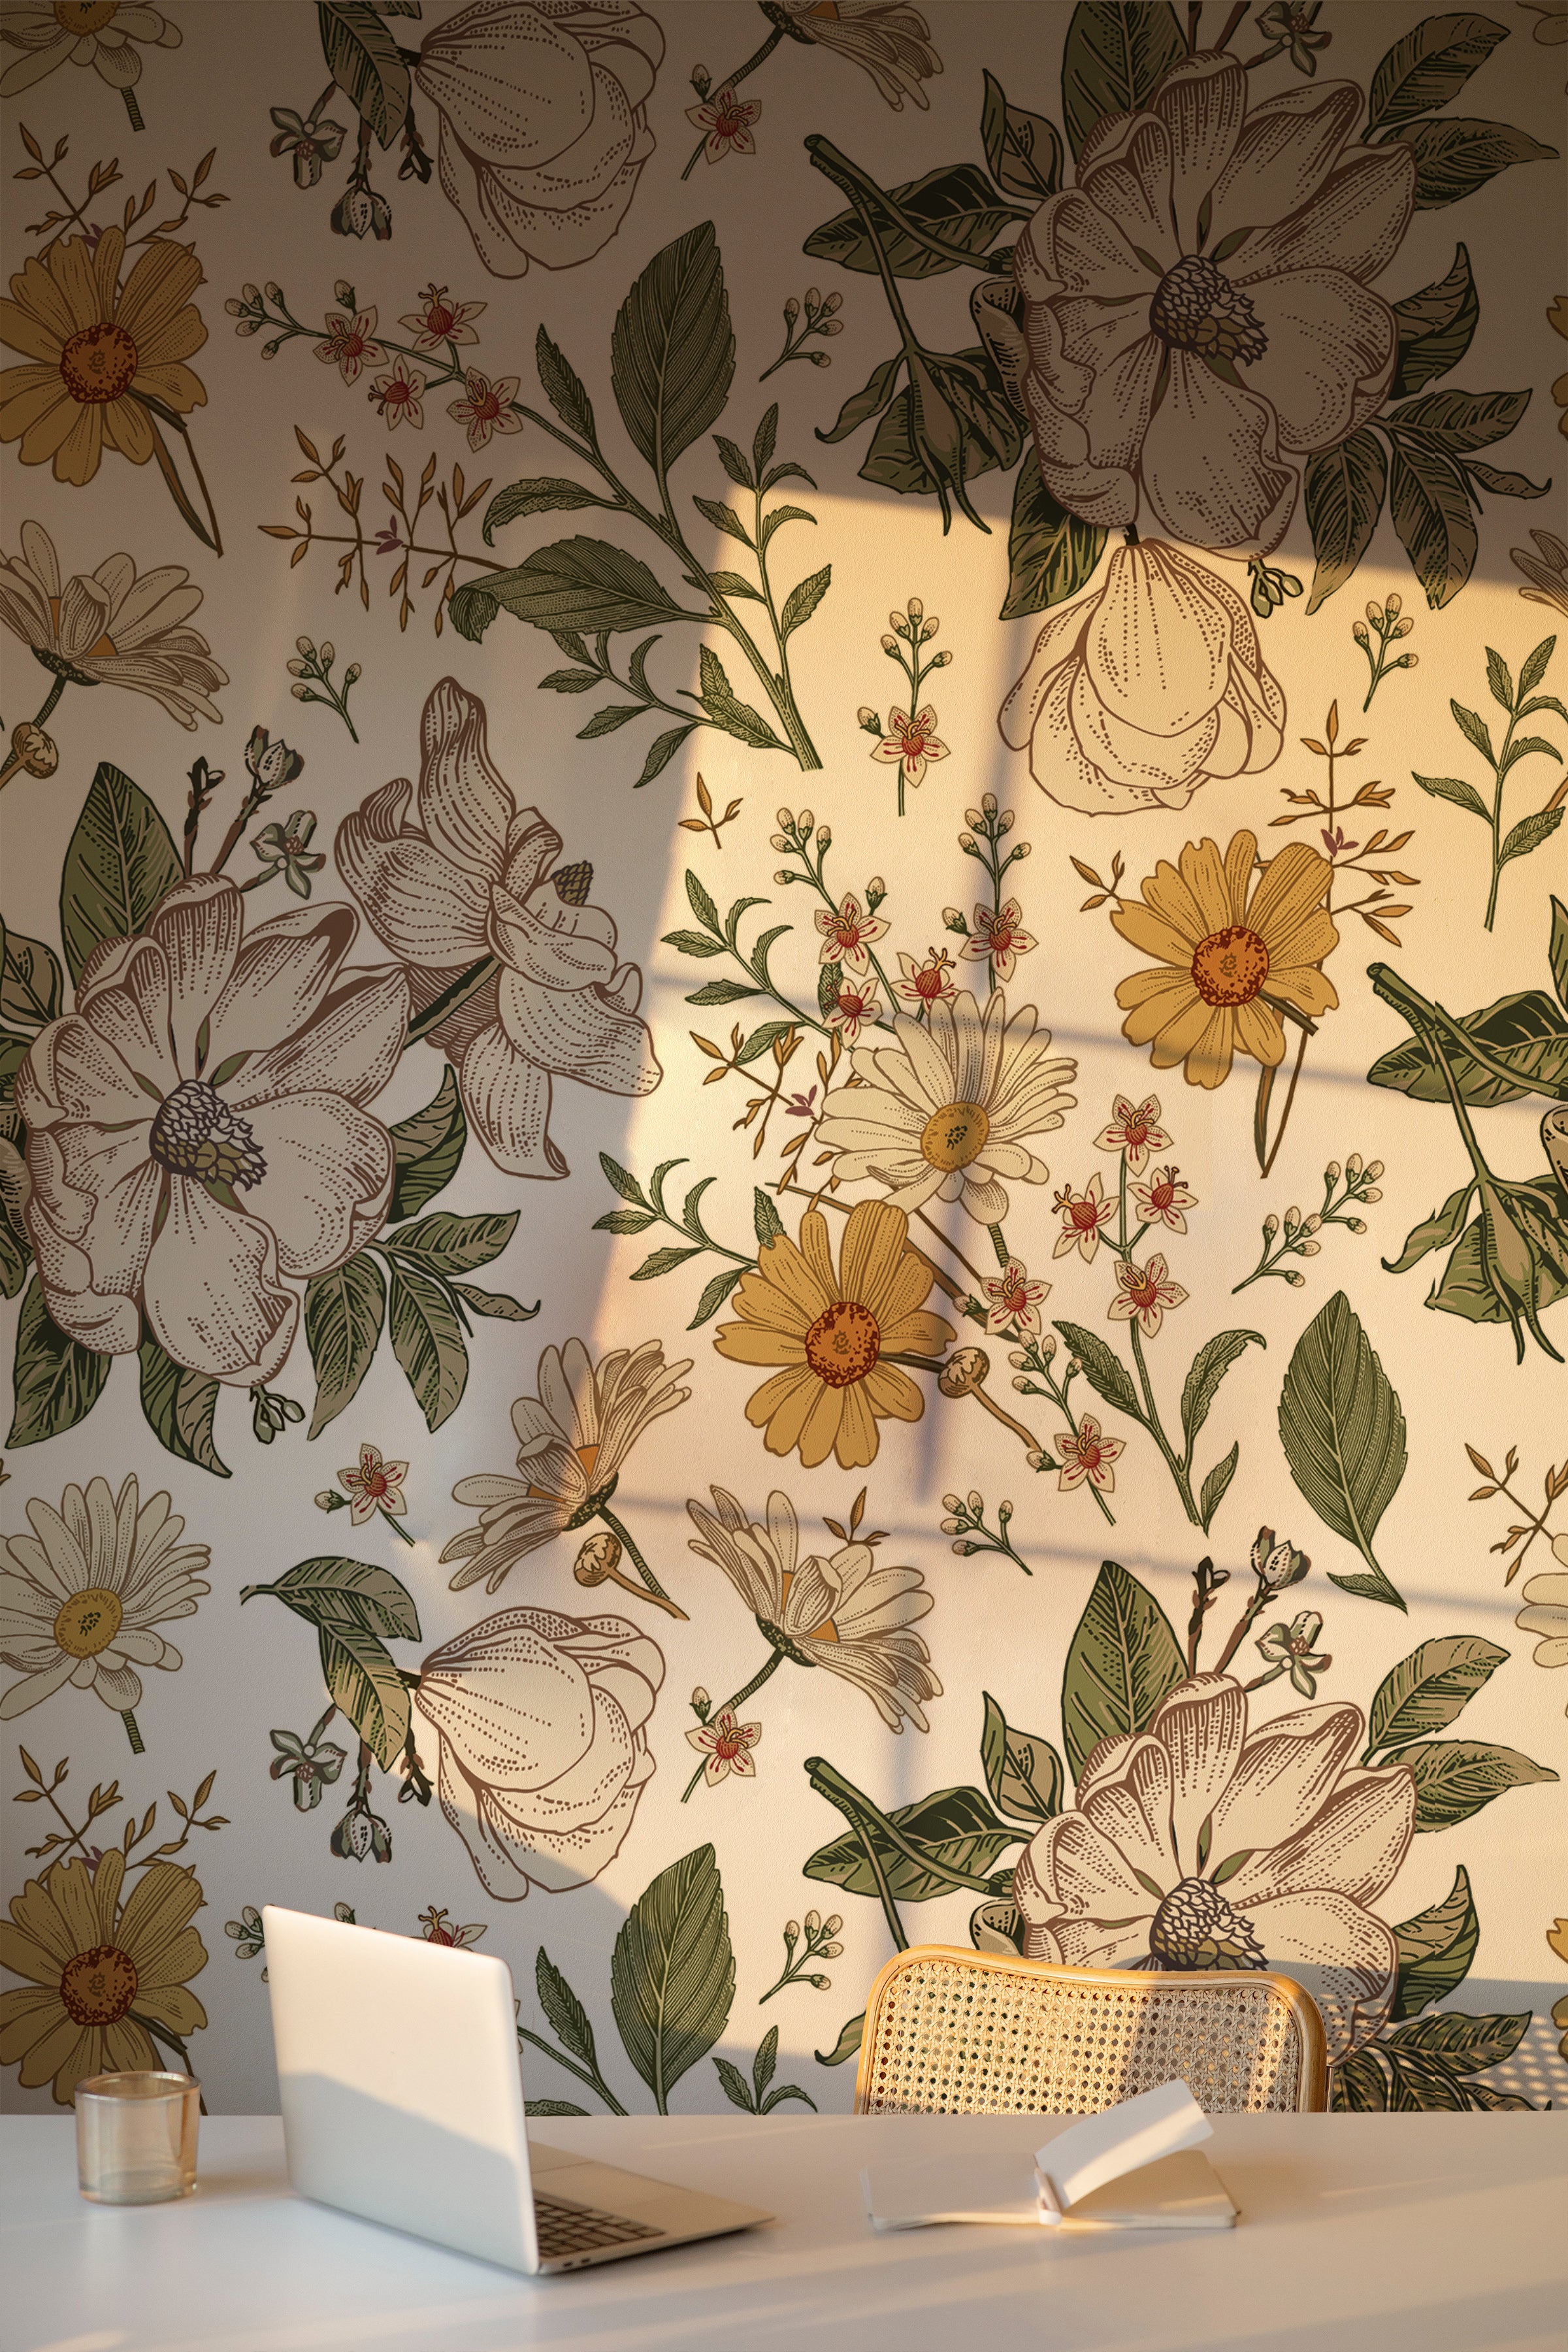 a cozy corner featuring the "Floral Wallpaper - Sunny II" bathed in warm light. The large, hand-drawn flowers and leaves create a lush backdrop, enhancing the warmth and welcoming atmosphere of the room, perfect for relaxation or reading.